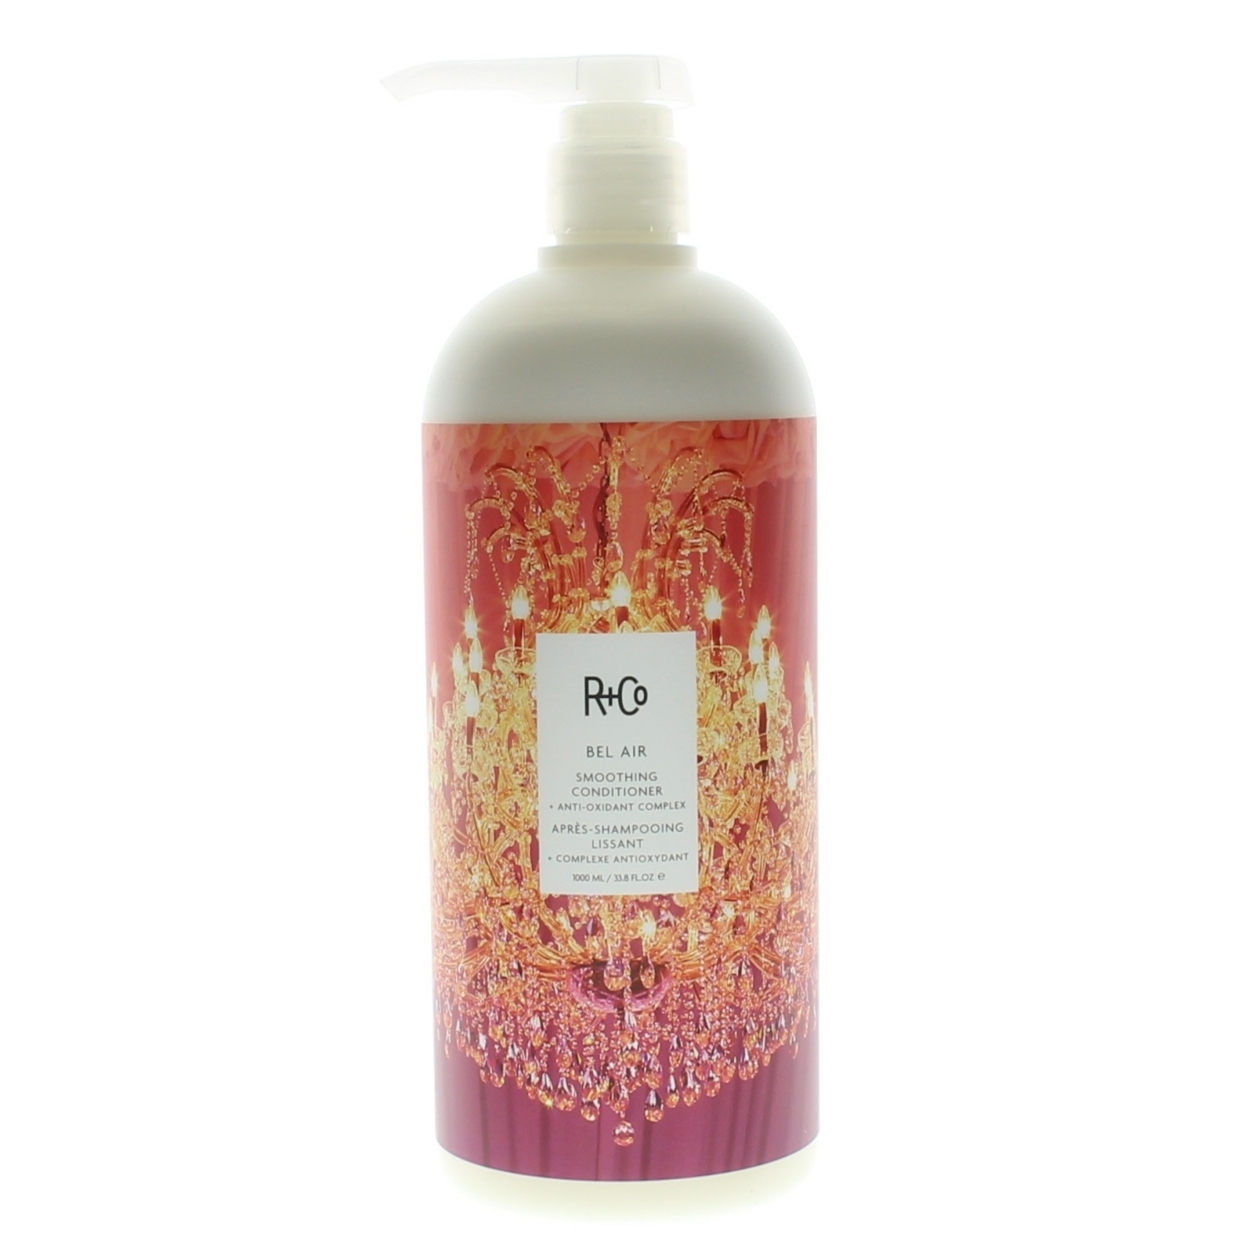 R+Co Bel Air Smoothing Conditioner + Anti-Oxidant Complex 33.8oz/1000ml